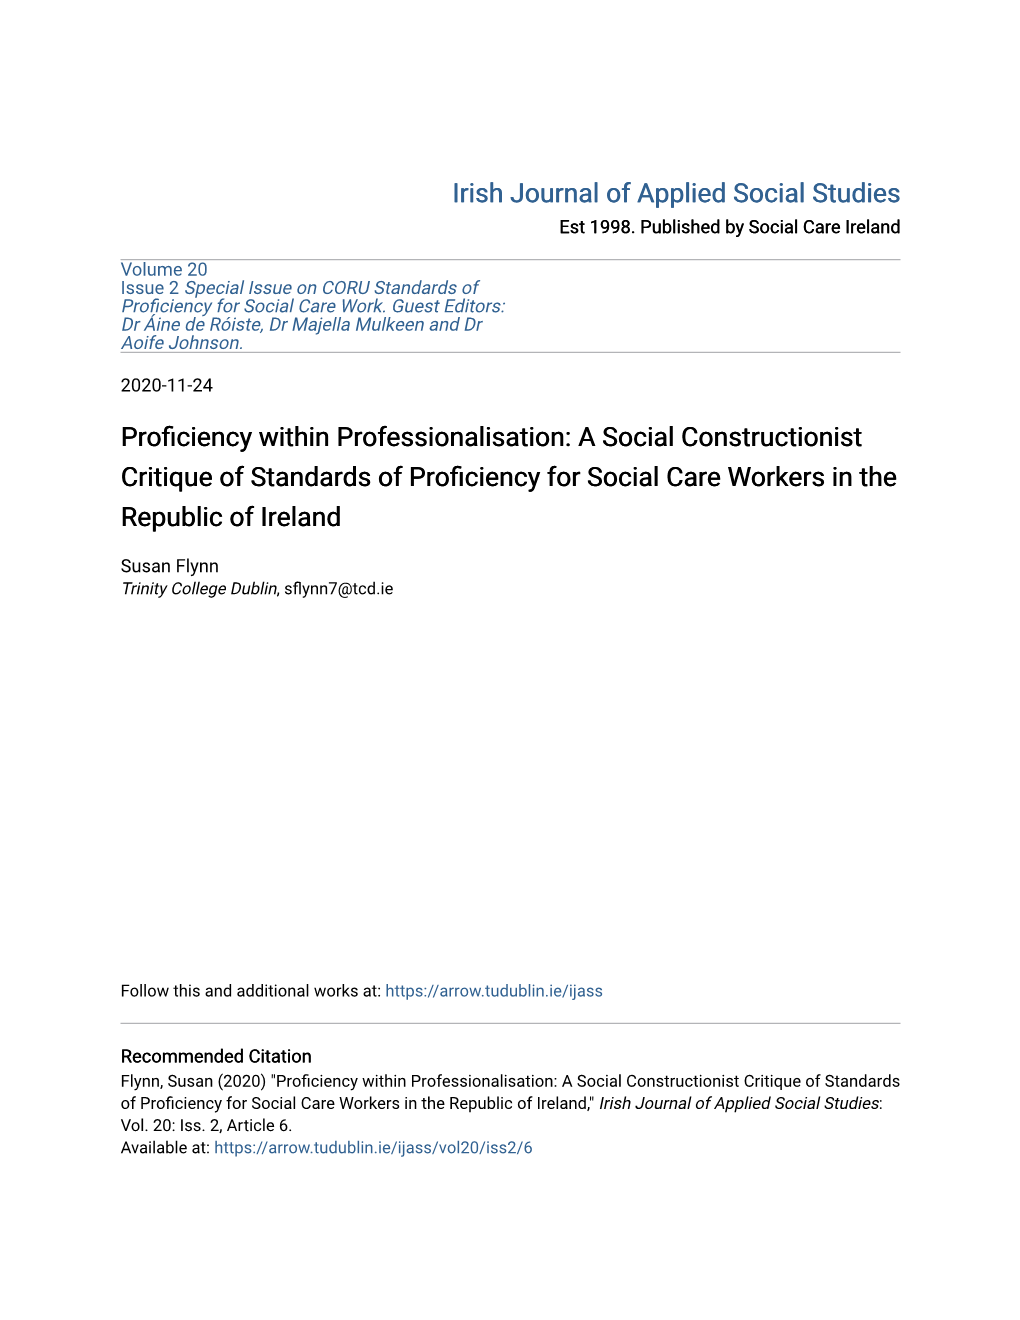 Proficiency Within Professionalisation: a Social Constructionist Critique of Standards of Proficiency for Social Care Workers in the Republic of Ireland